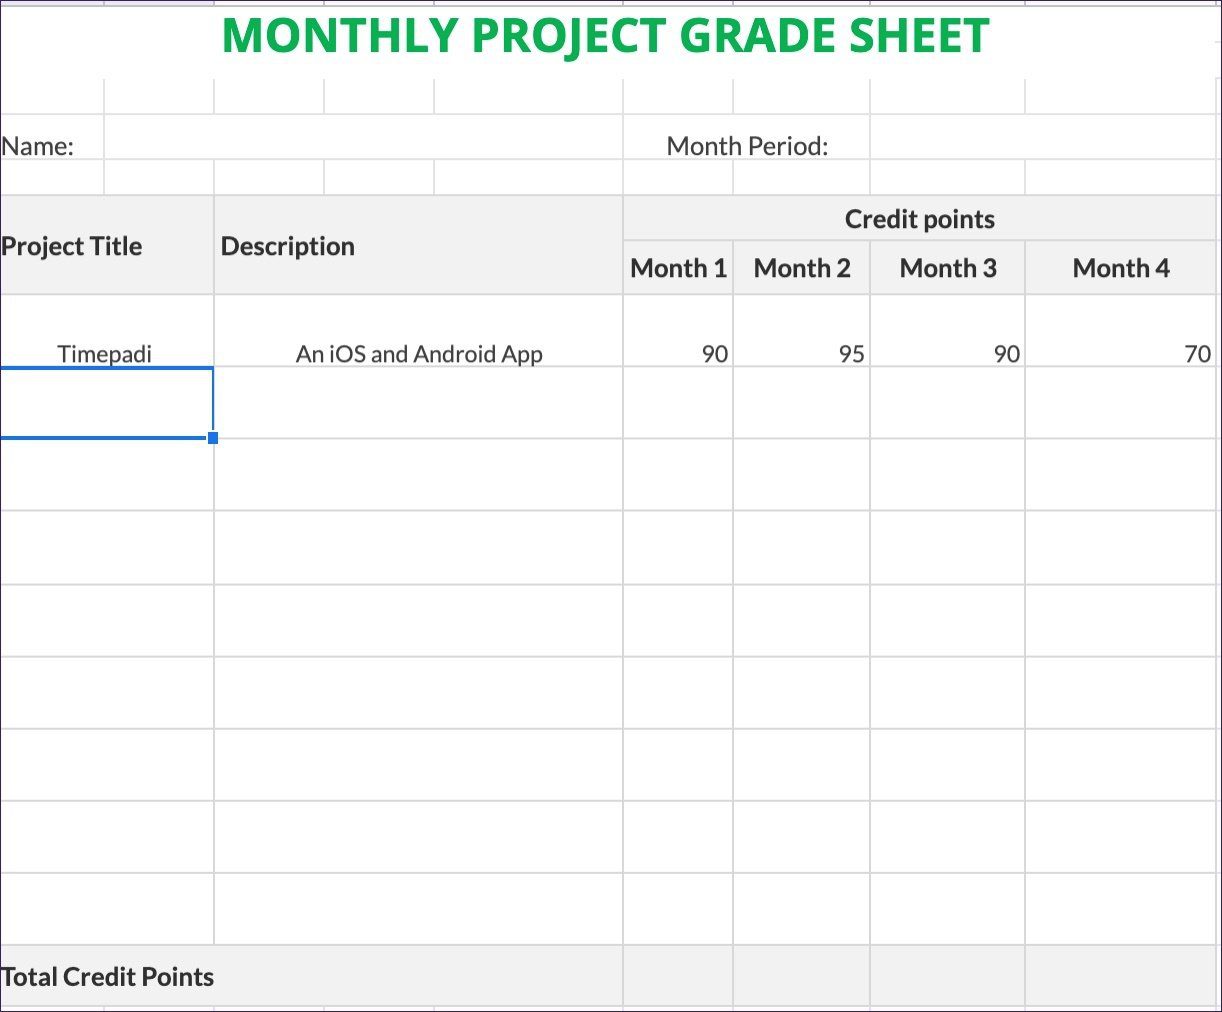 Monthly project grade